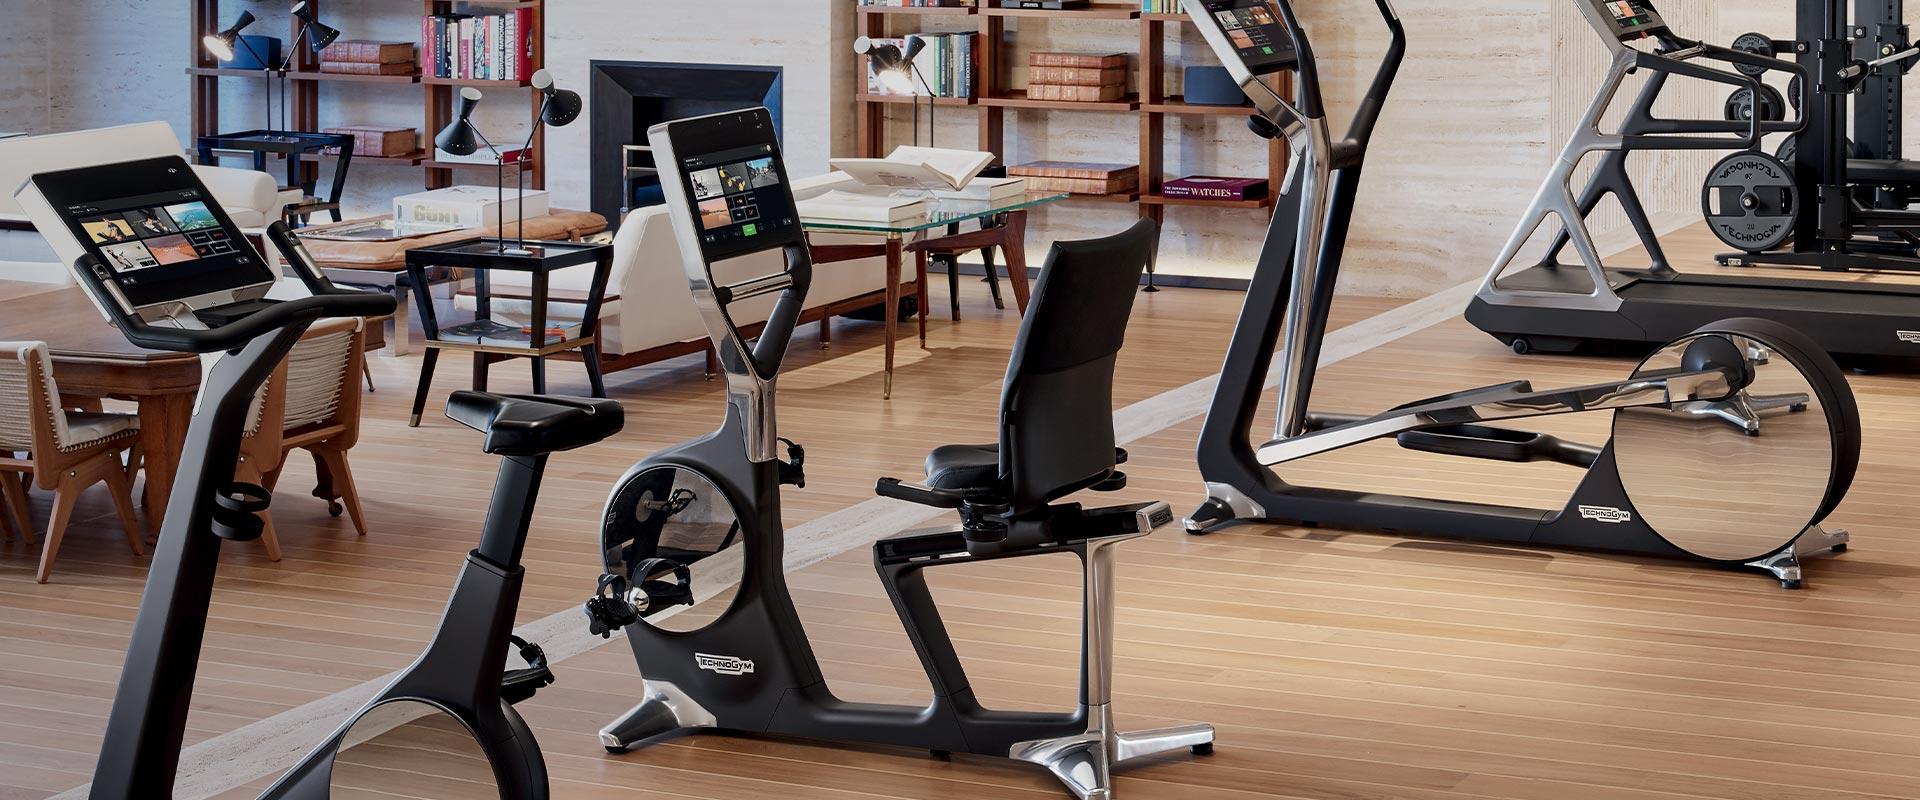 TGF offers a maximum of 12.000.000 ordinary shares of Technogym S.p.A. through an accelerated bookbuilding procedure reserved to institutional investors